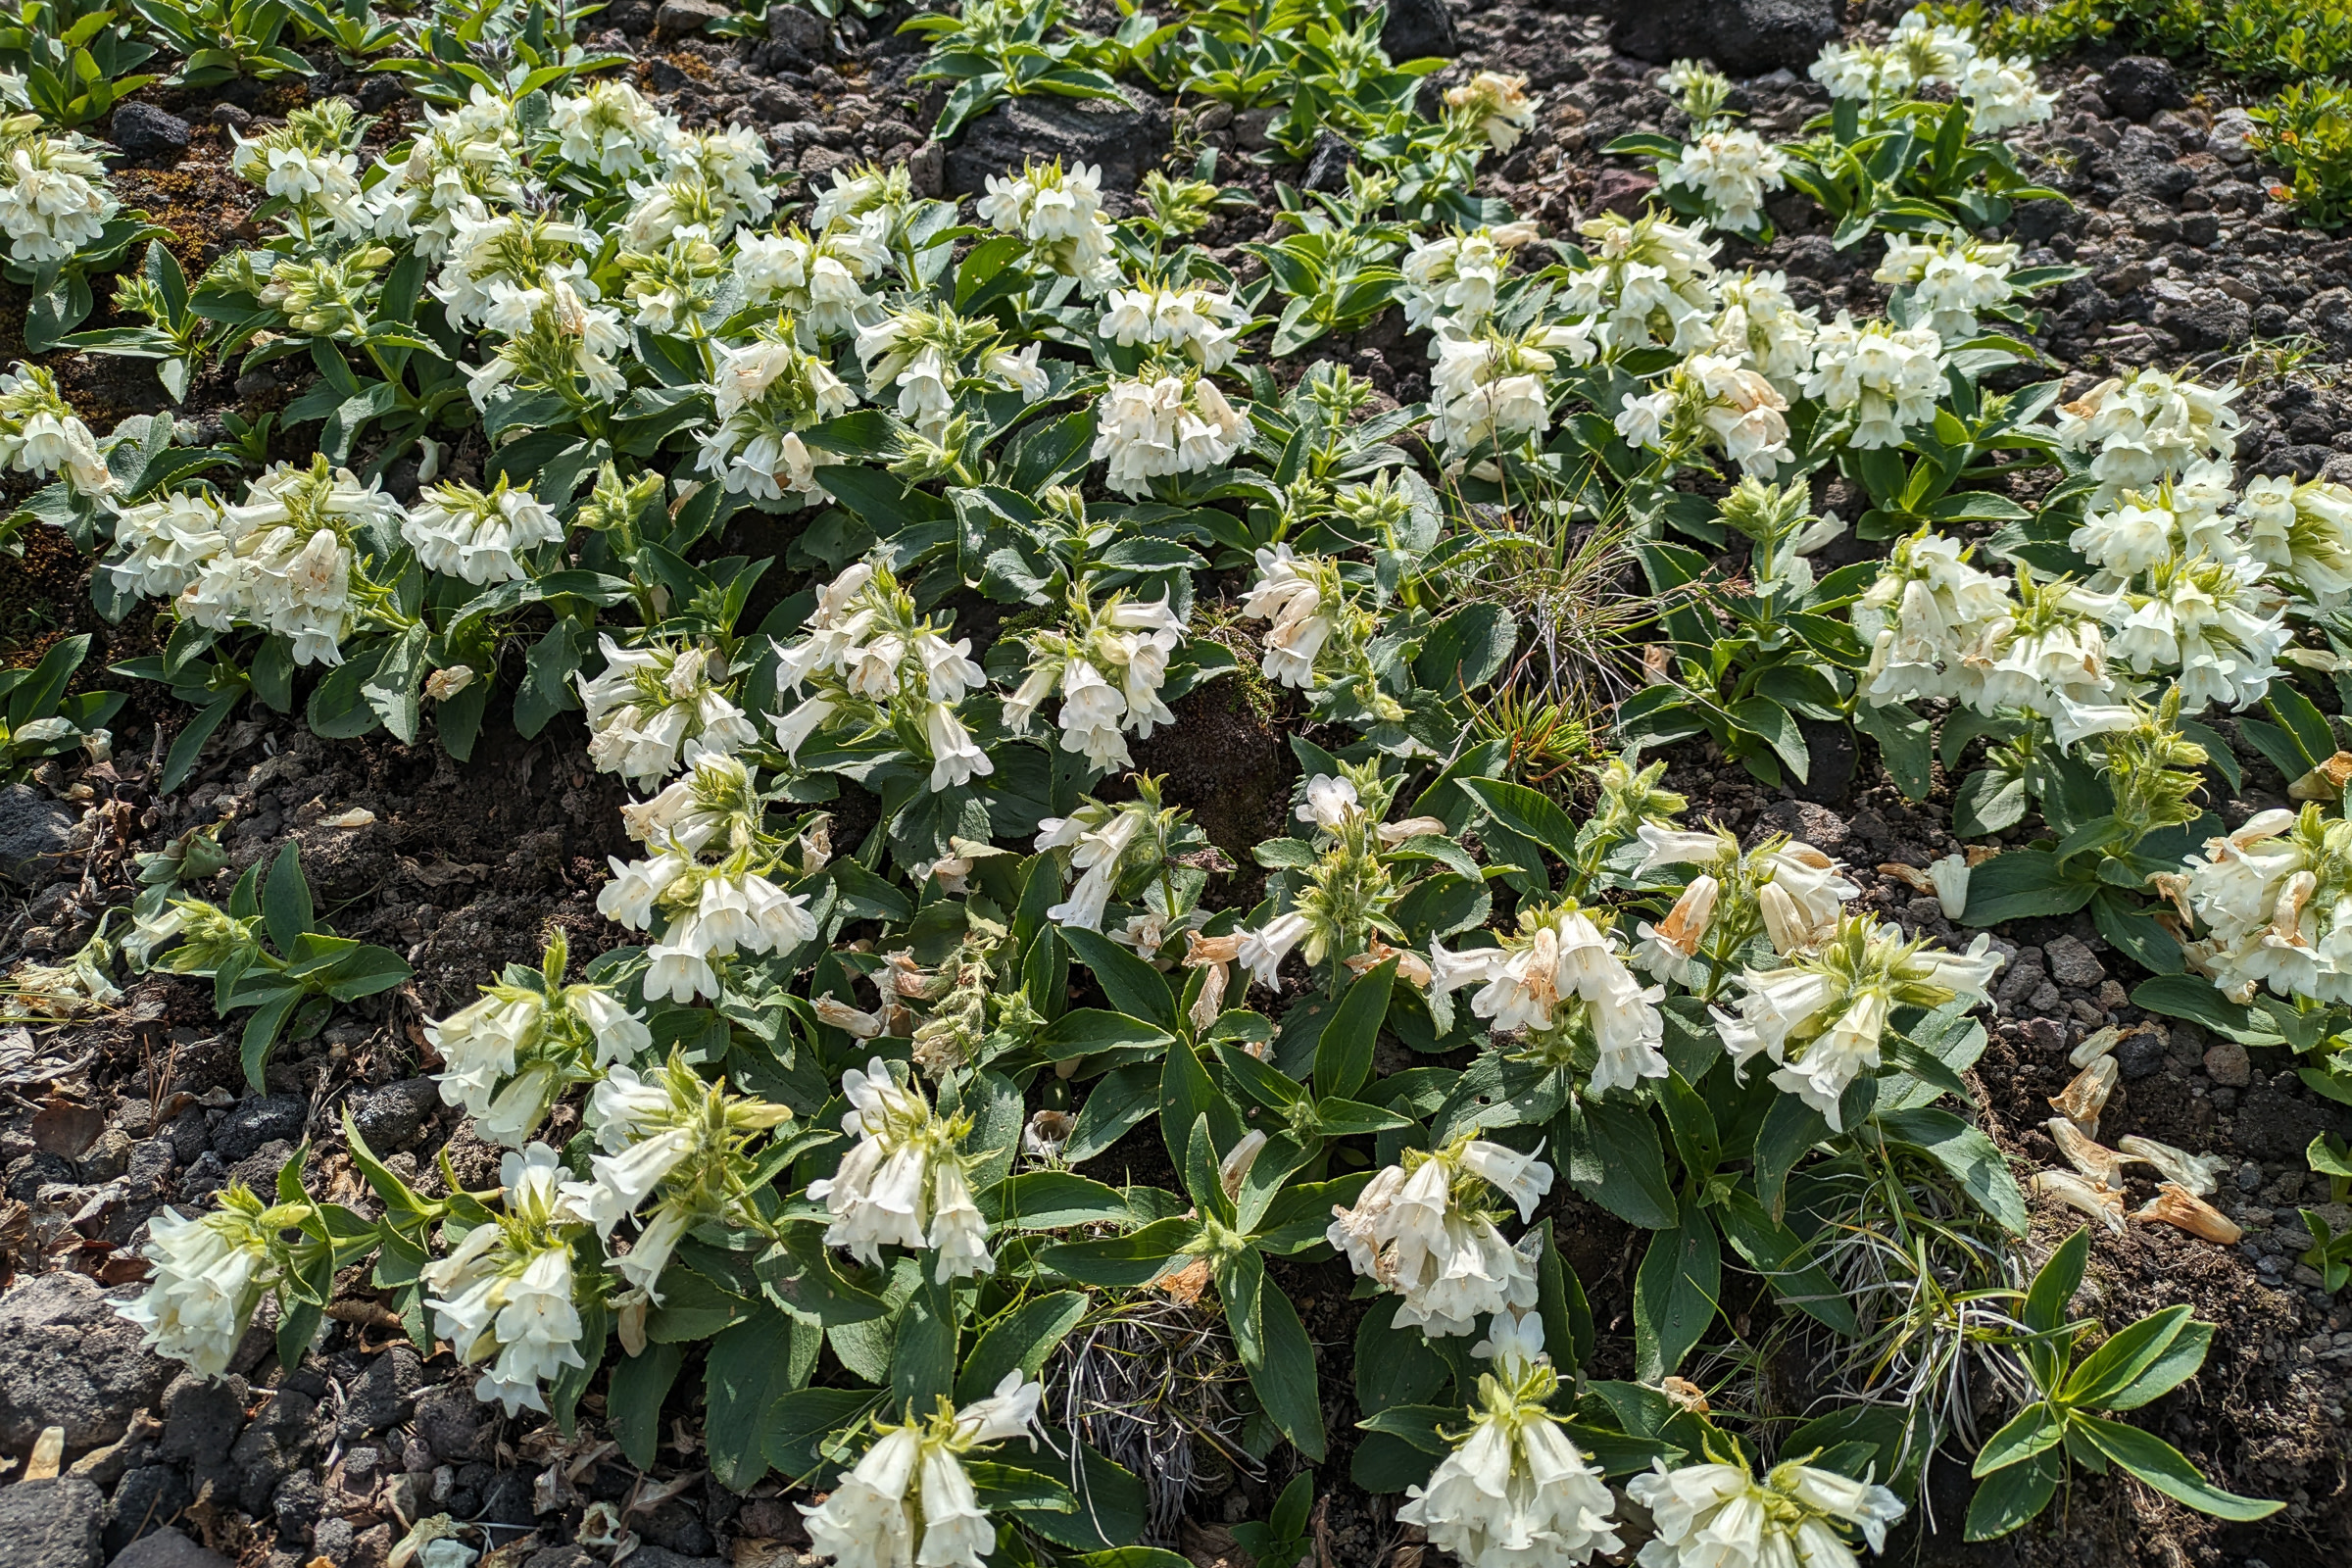 White Pennellianthus frutescens in full bloom in early July in Daisetsuzan.